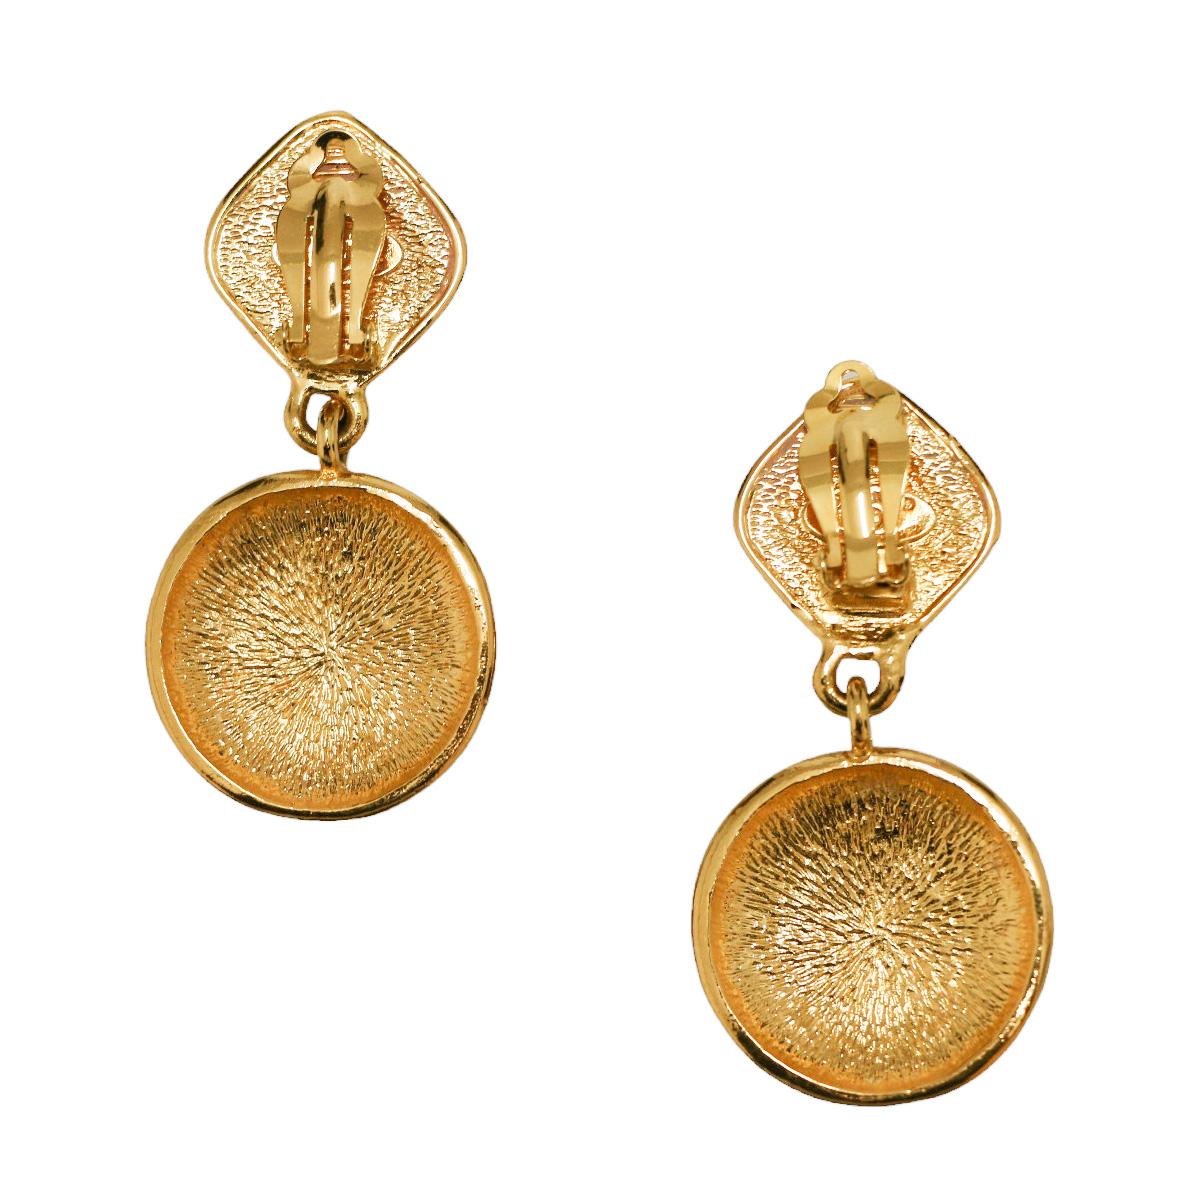 Beautiful clips-on earrings from Chanel with CC pendant from 1990-1992.

In excellent condition. Made in France.
Material: metal
Color: golden
Dimensions: clips 2.5 x 2.5 cm, CC pendant 3 x 3 cm
Stamp: yes
Year: 1990-1992